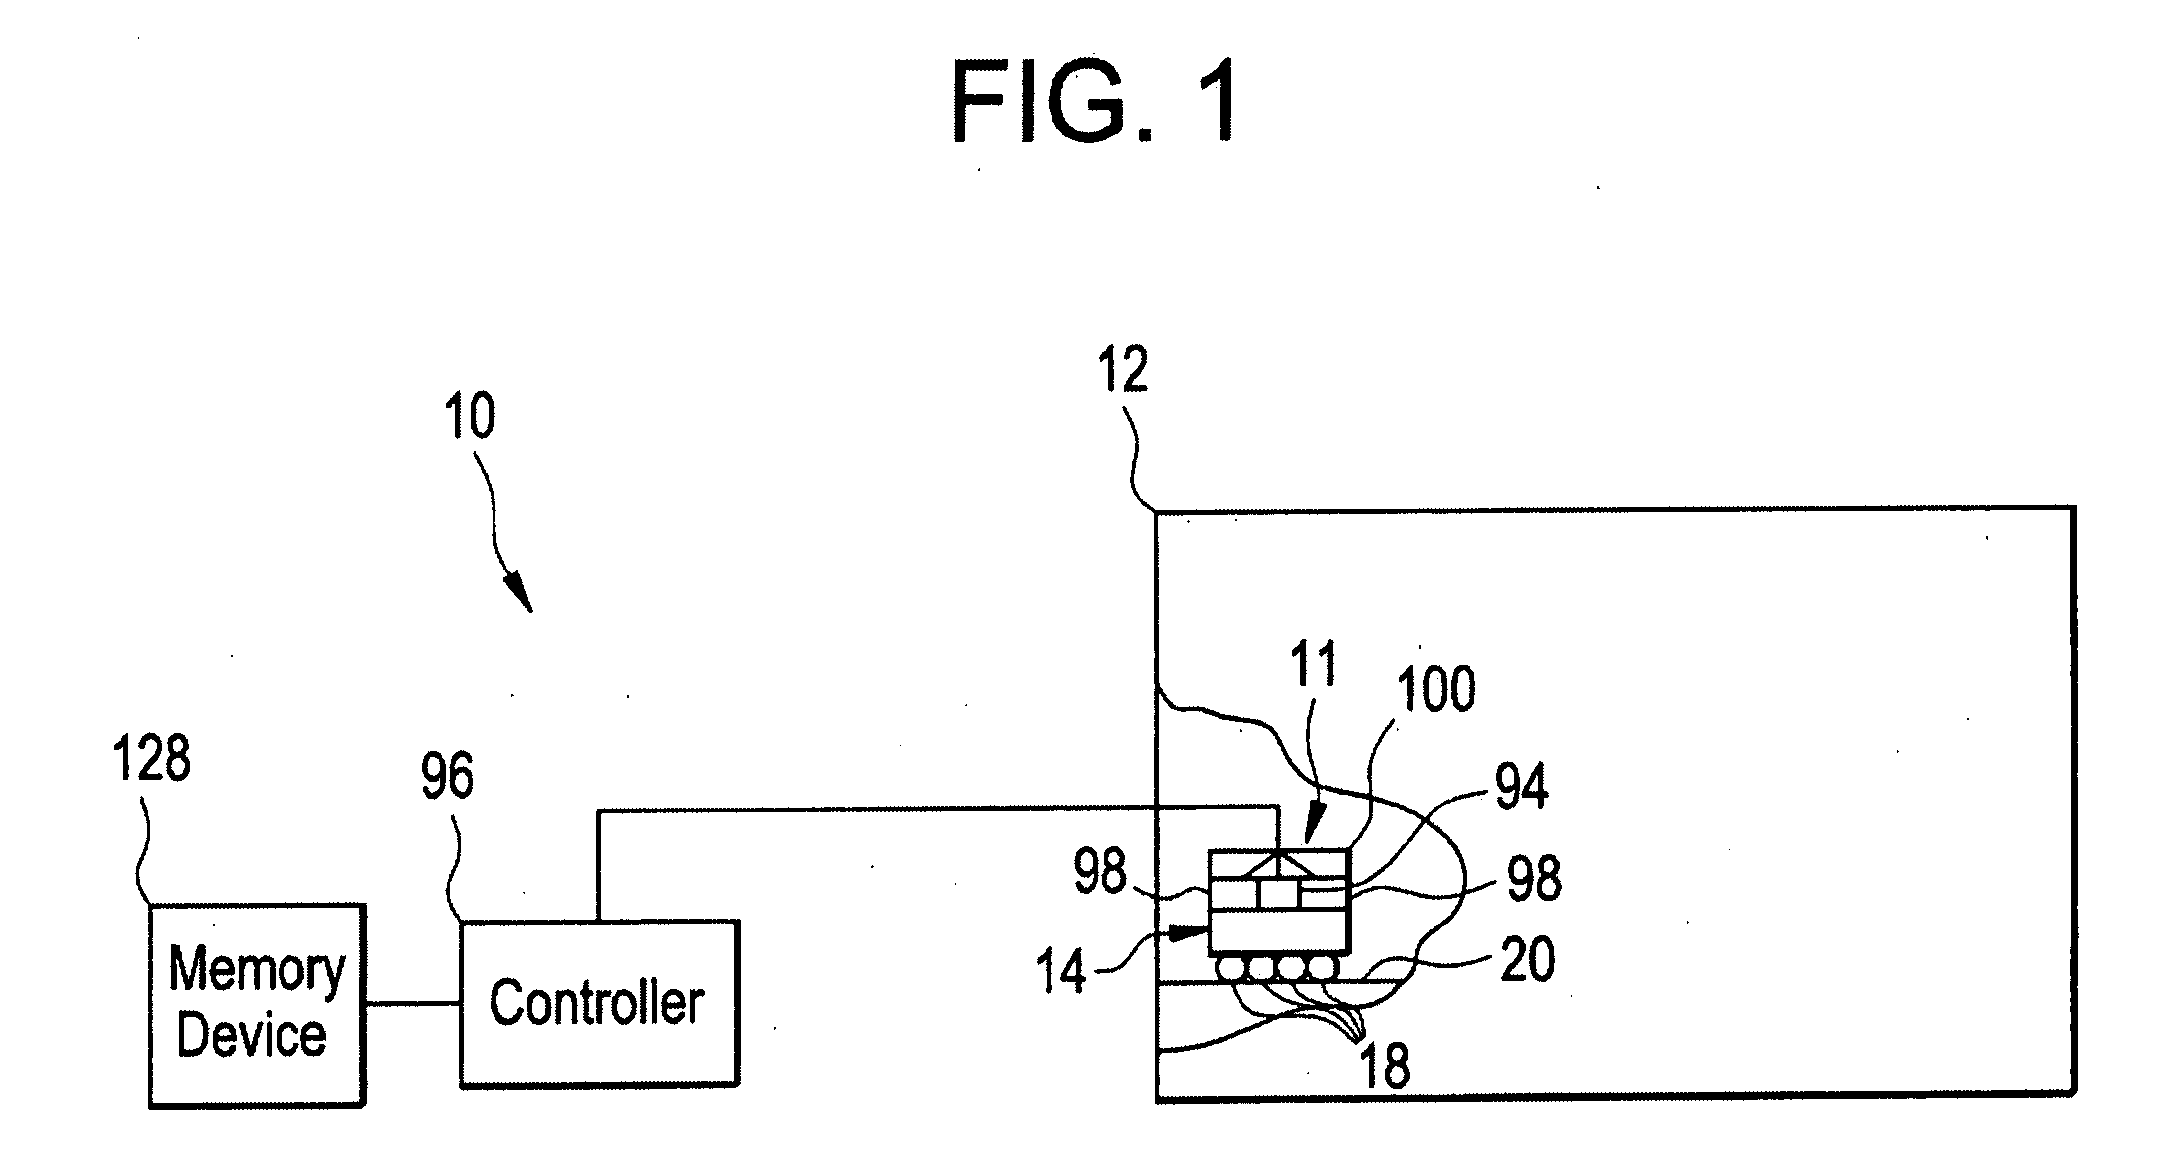 Method and apparatus for linear measurement of a stator core